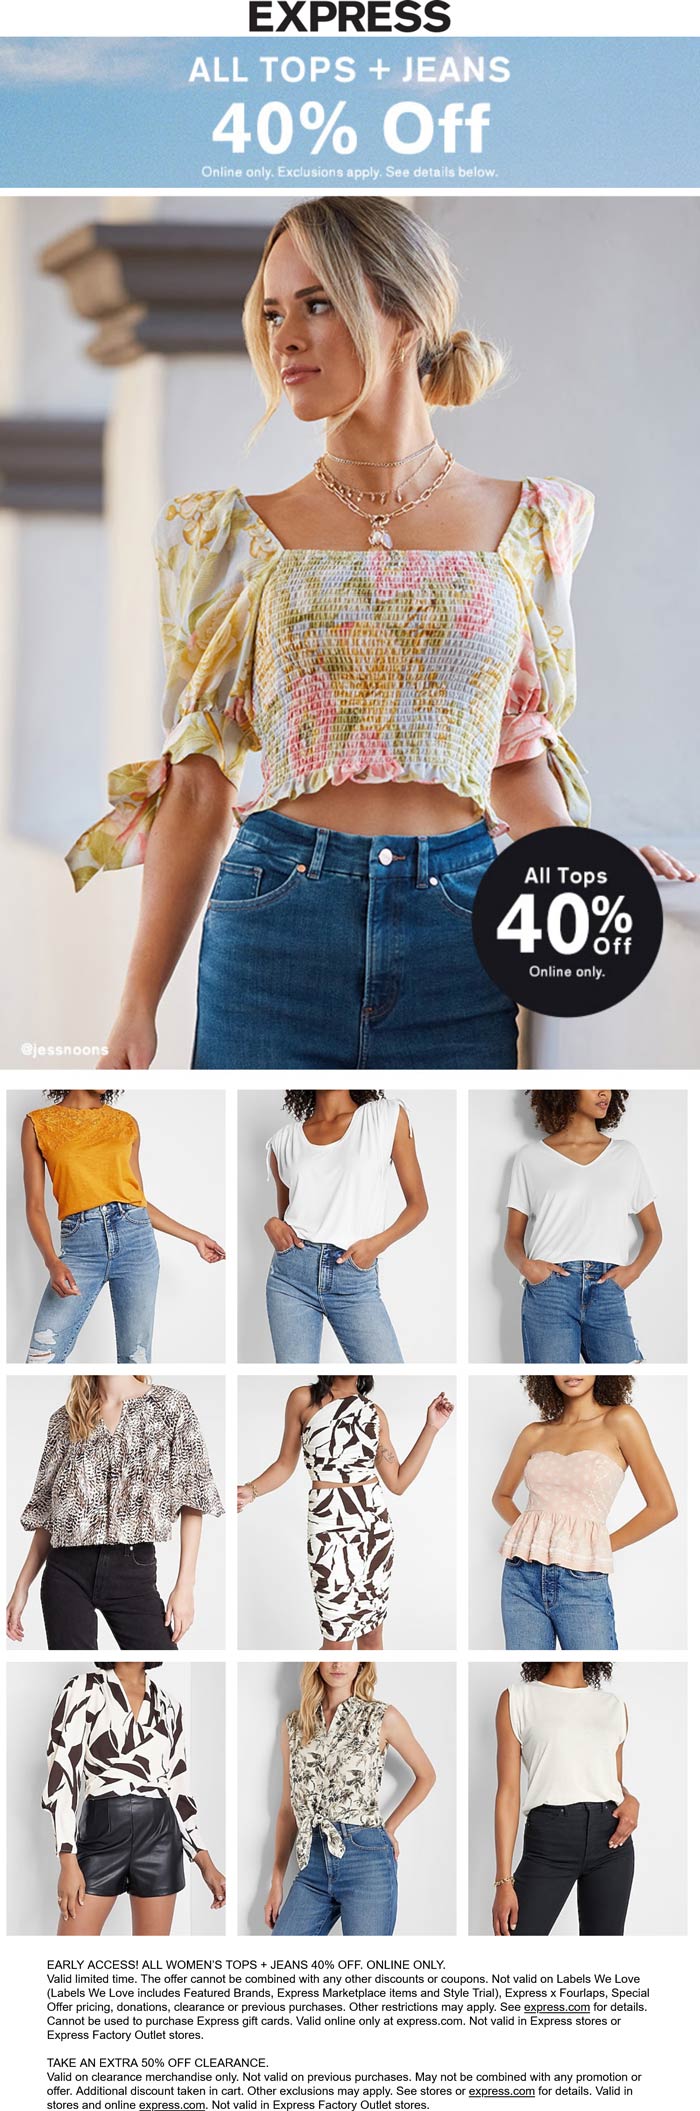 Express stores Coupon  40% off all jeans & tops online at Express #express 